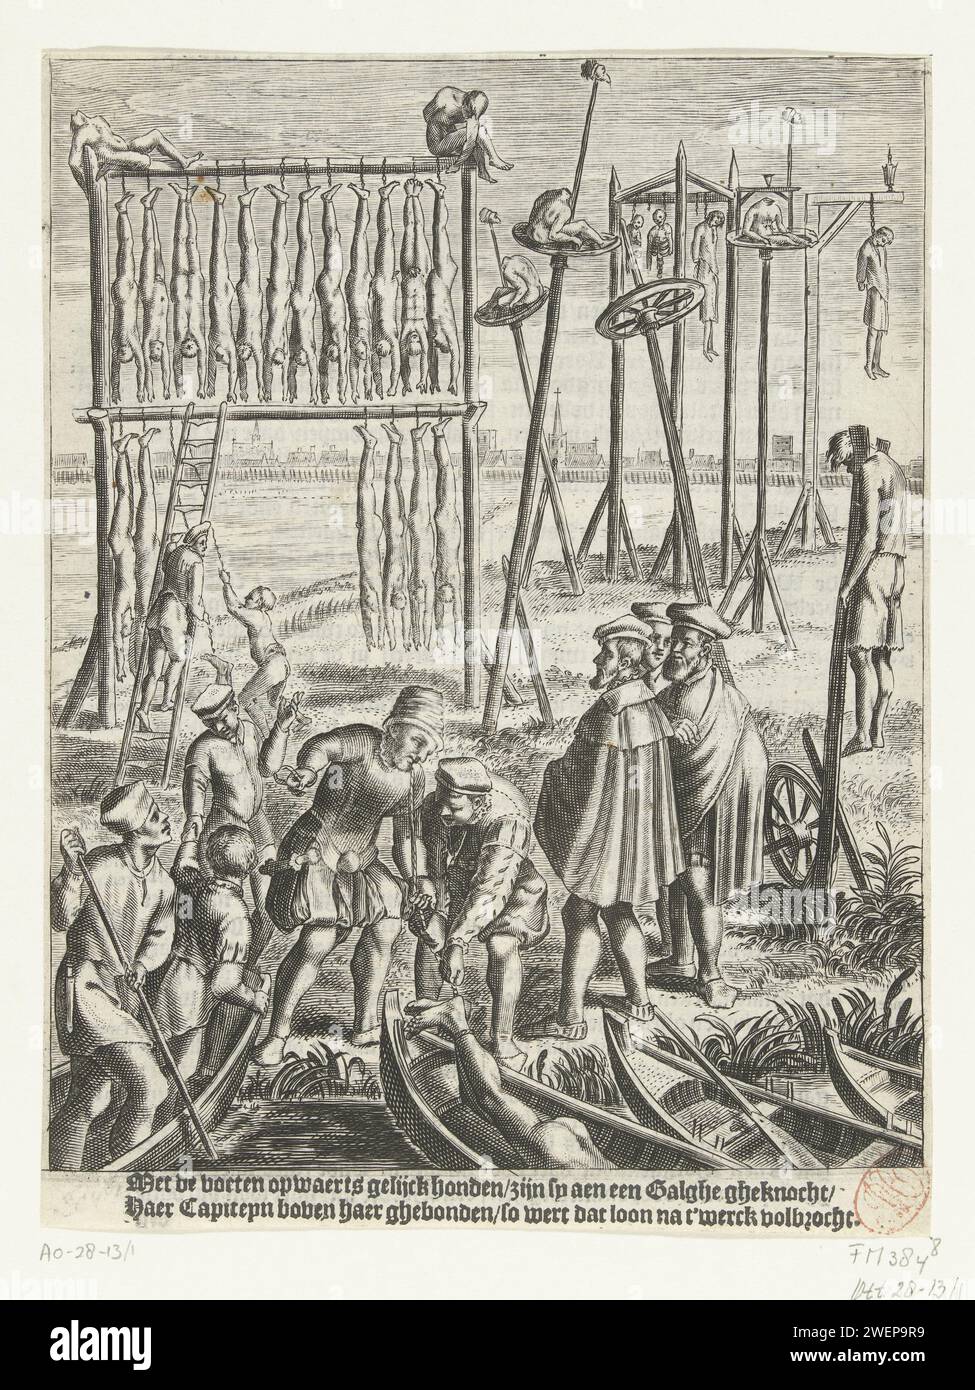 The corpses of the backlower on the Galgenveld, 1535, 1612 - 1614 print The corpses of the reverse sky are hung on gallows on the Galgenveld Volewijk, 1535. Print from the book. Under the show a verse of two lines.  paper engraving body of the executed displayed in public Volewijk Stock Photo